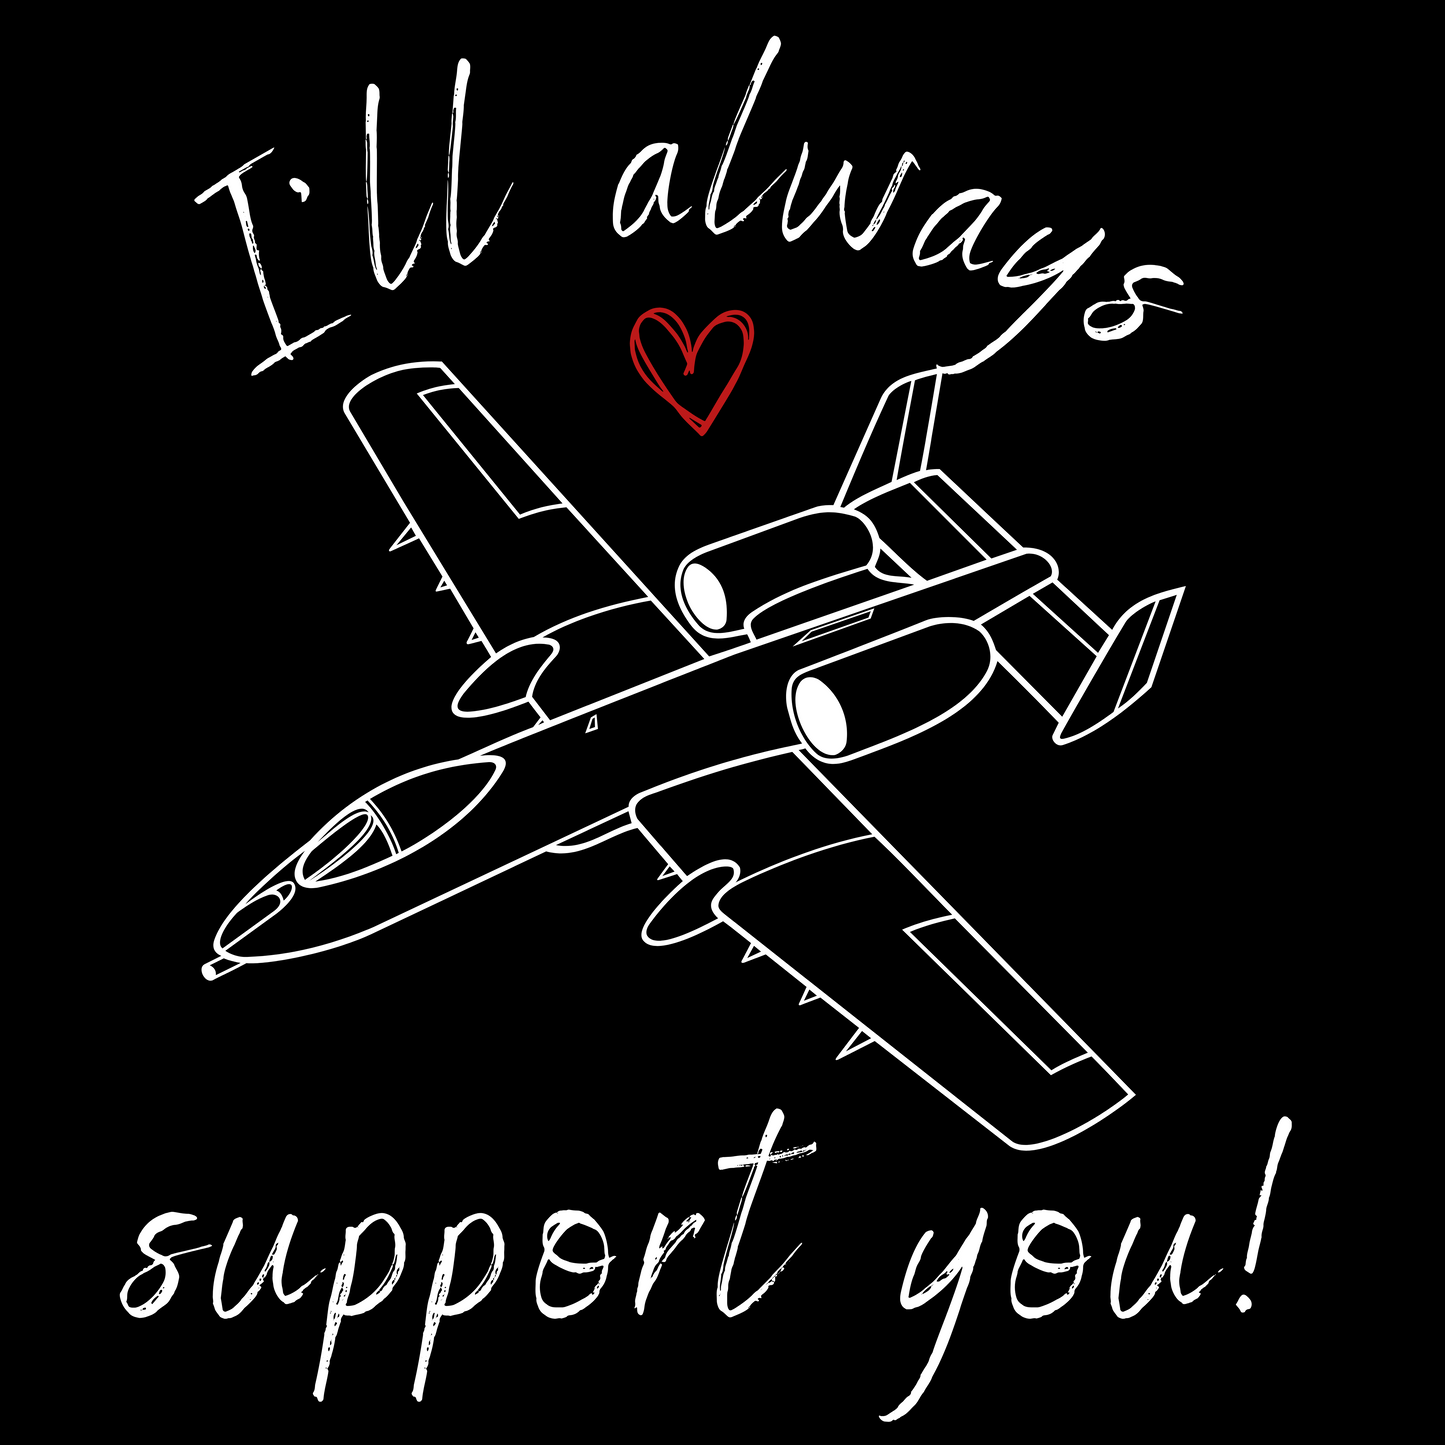 Funny A10 Warthog Support T-shirt